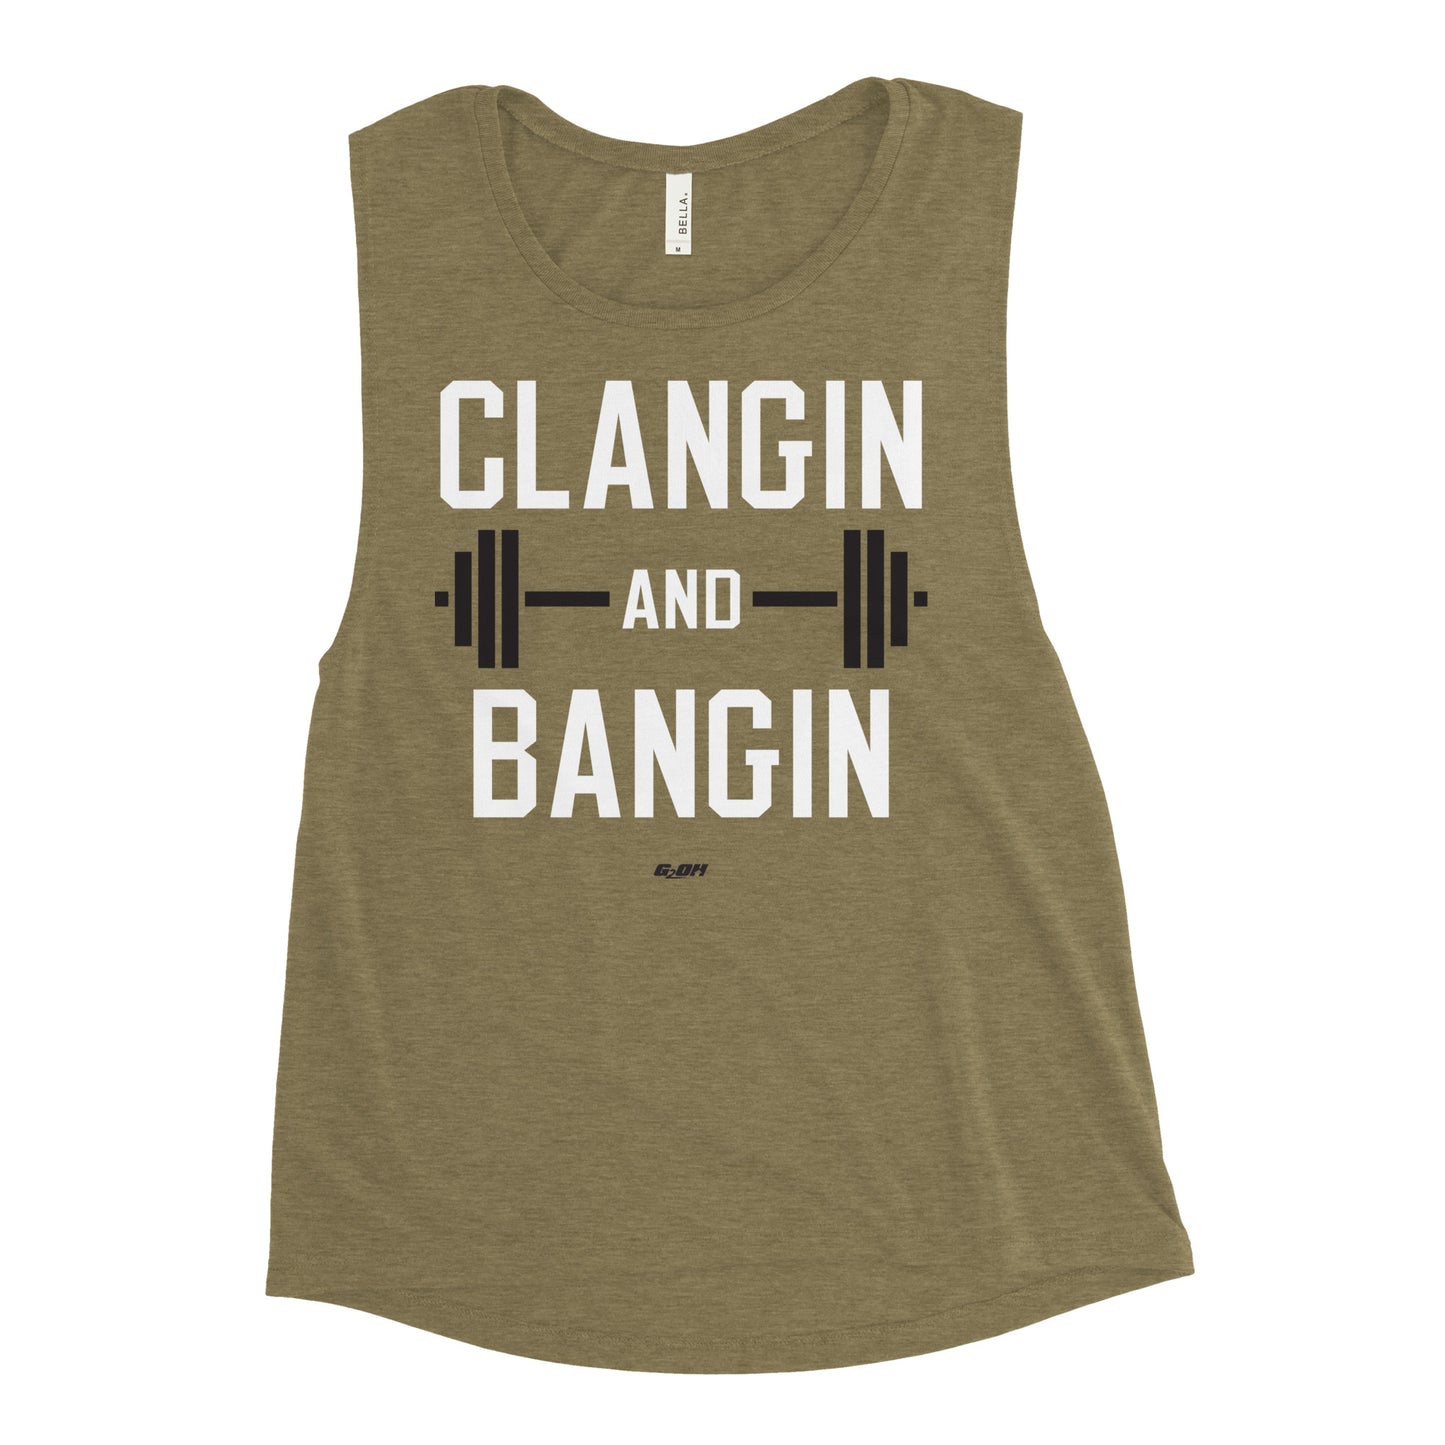 Clangin' And Bangin' Women's Muscle Tank